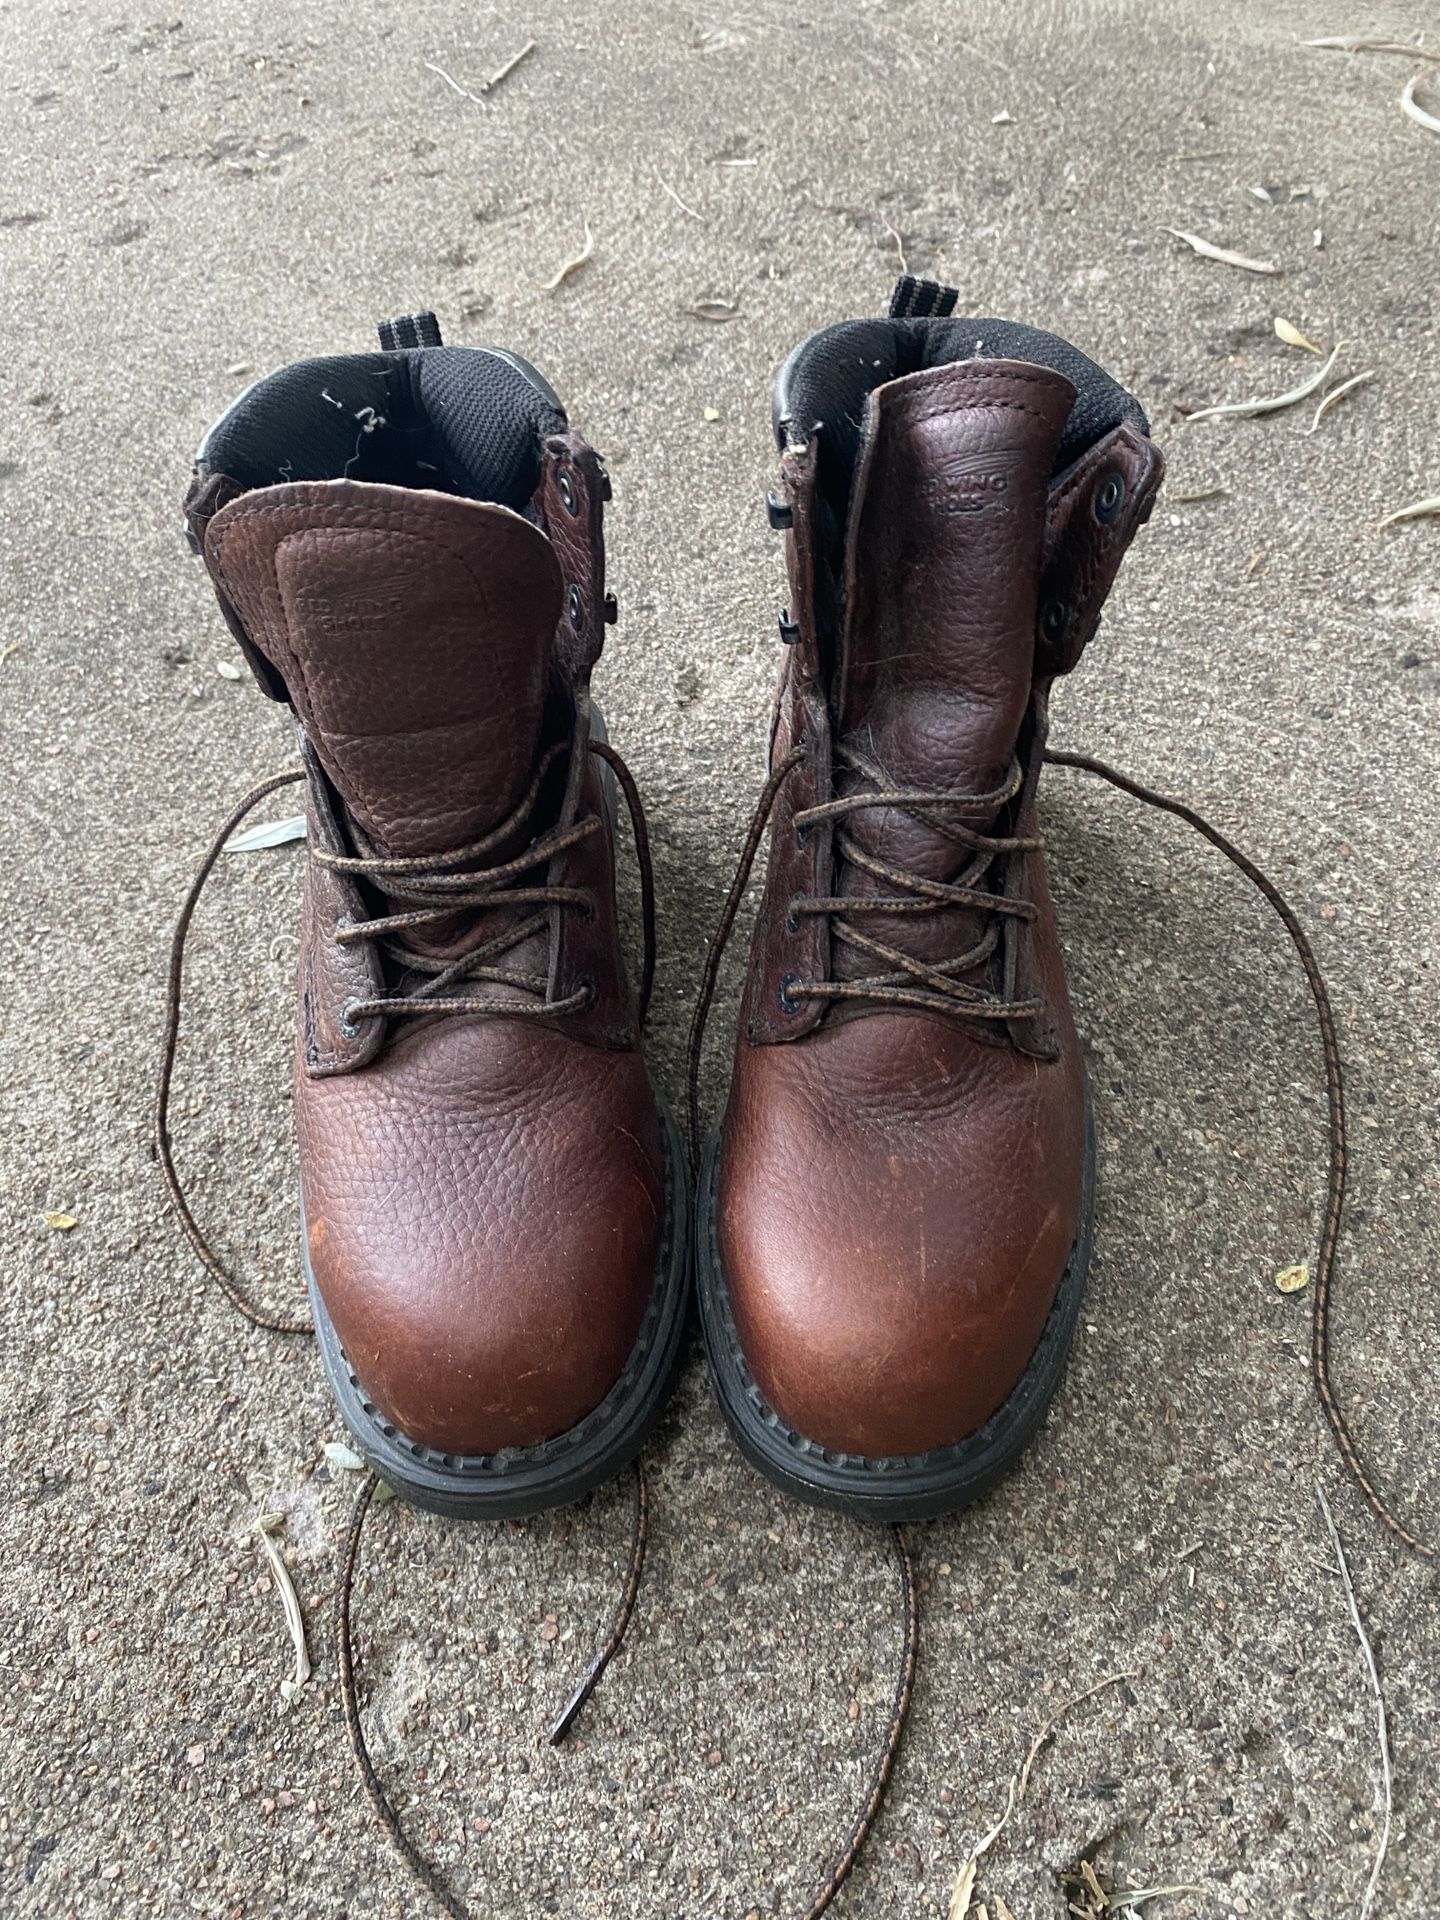 Women’s Red Wing Safety Boots 7.5-8